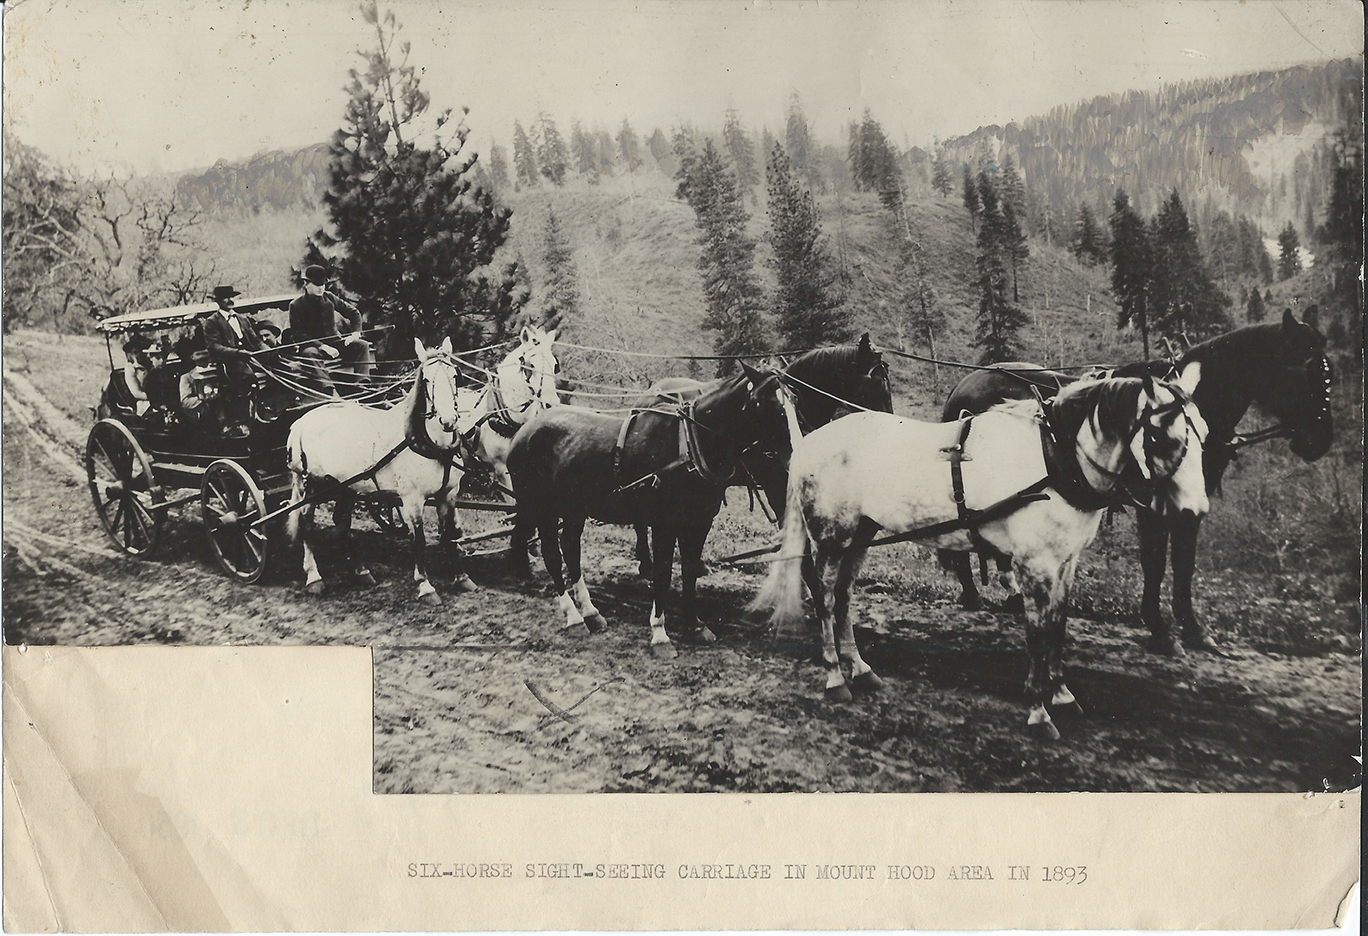 Six-horse sight-seeing carriage in Mount Hood area in 1893